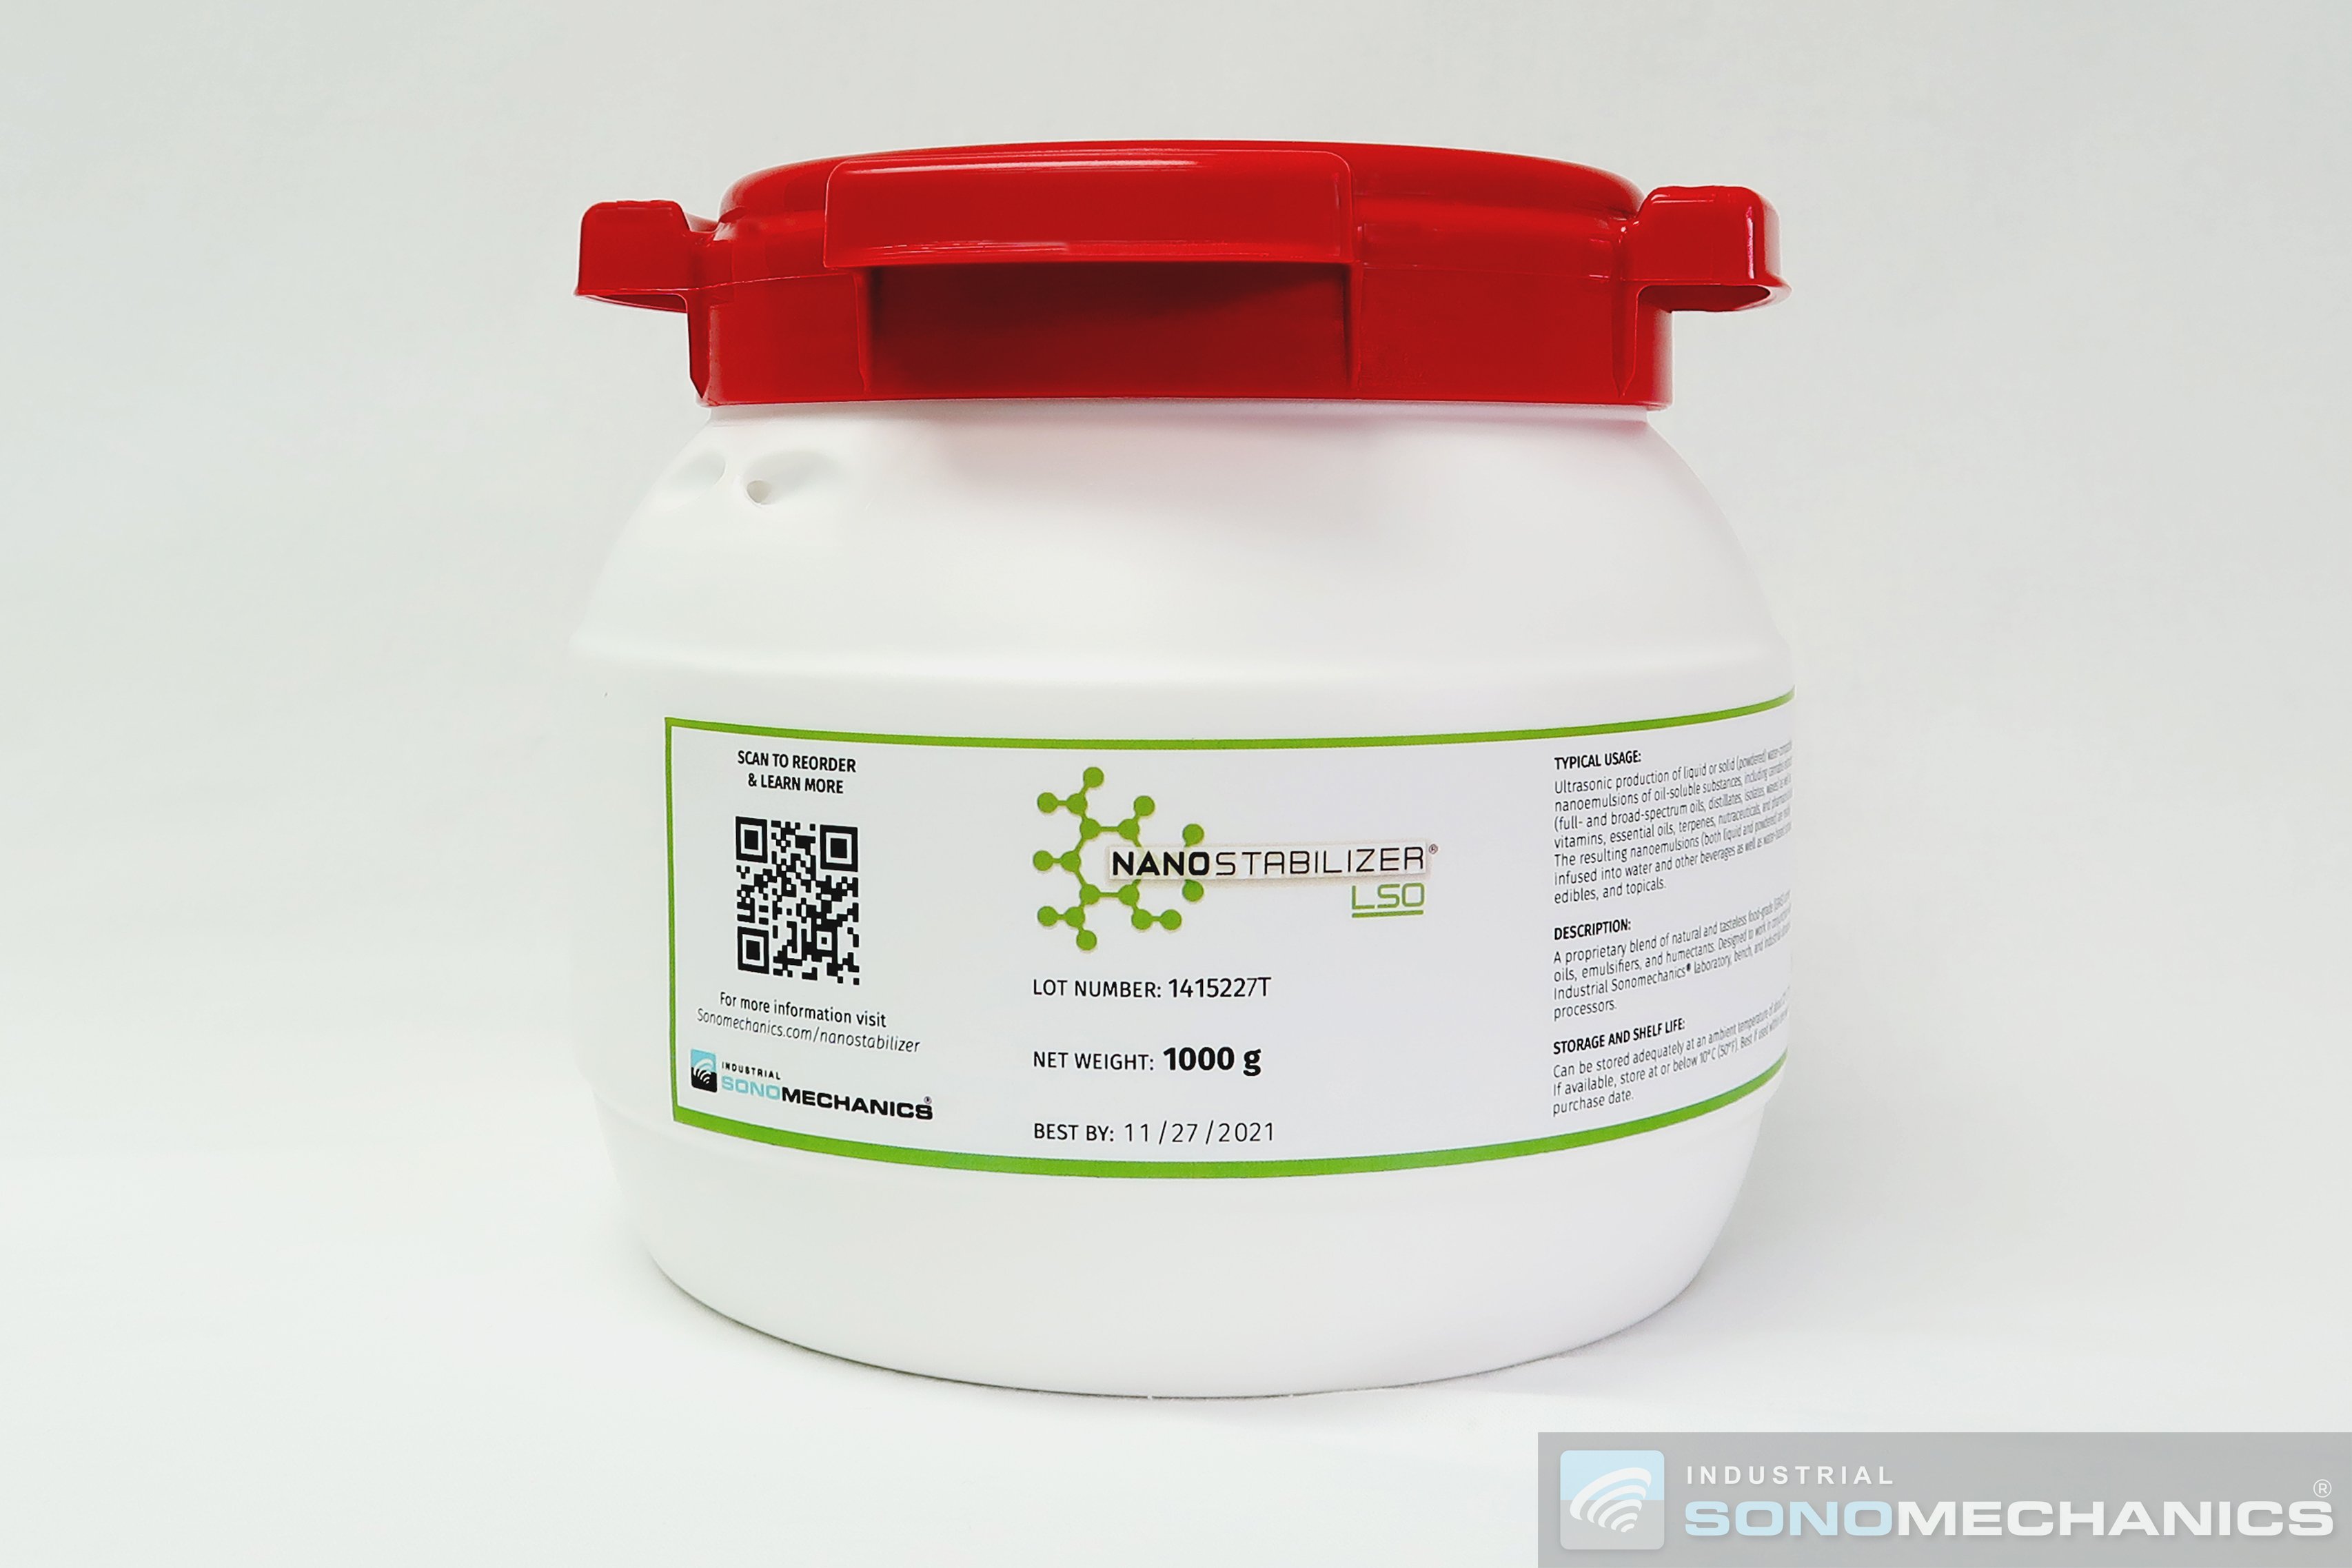 NanoStabilizer-LSO for water-soluble CBD and THC powder